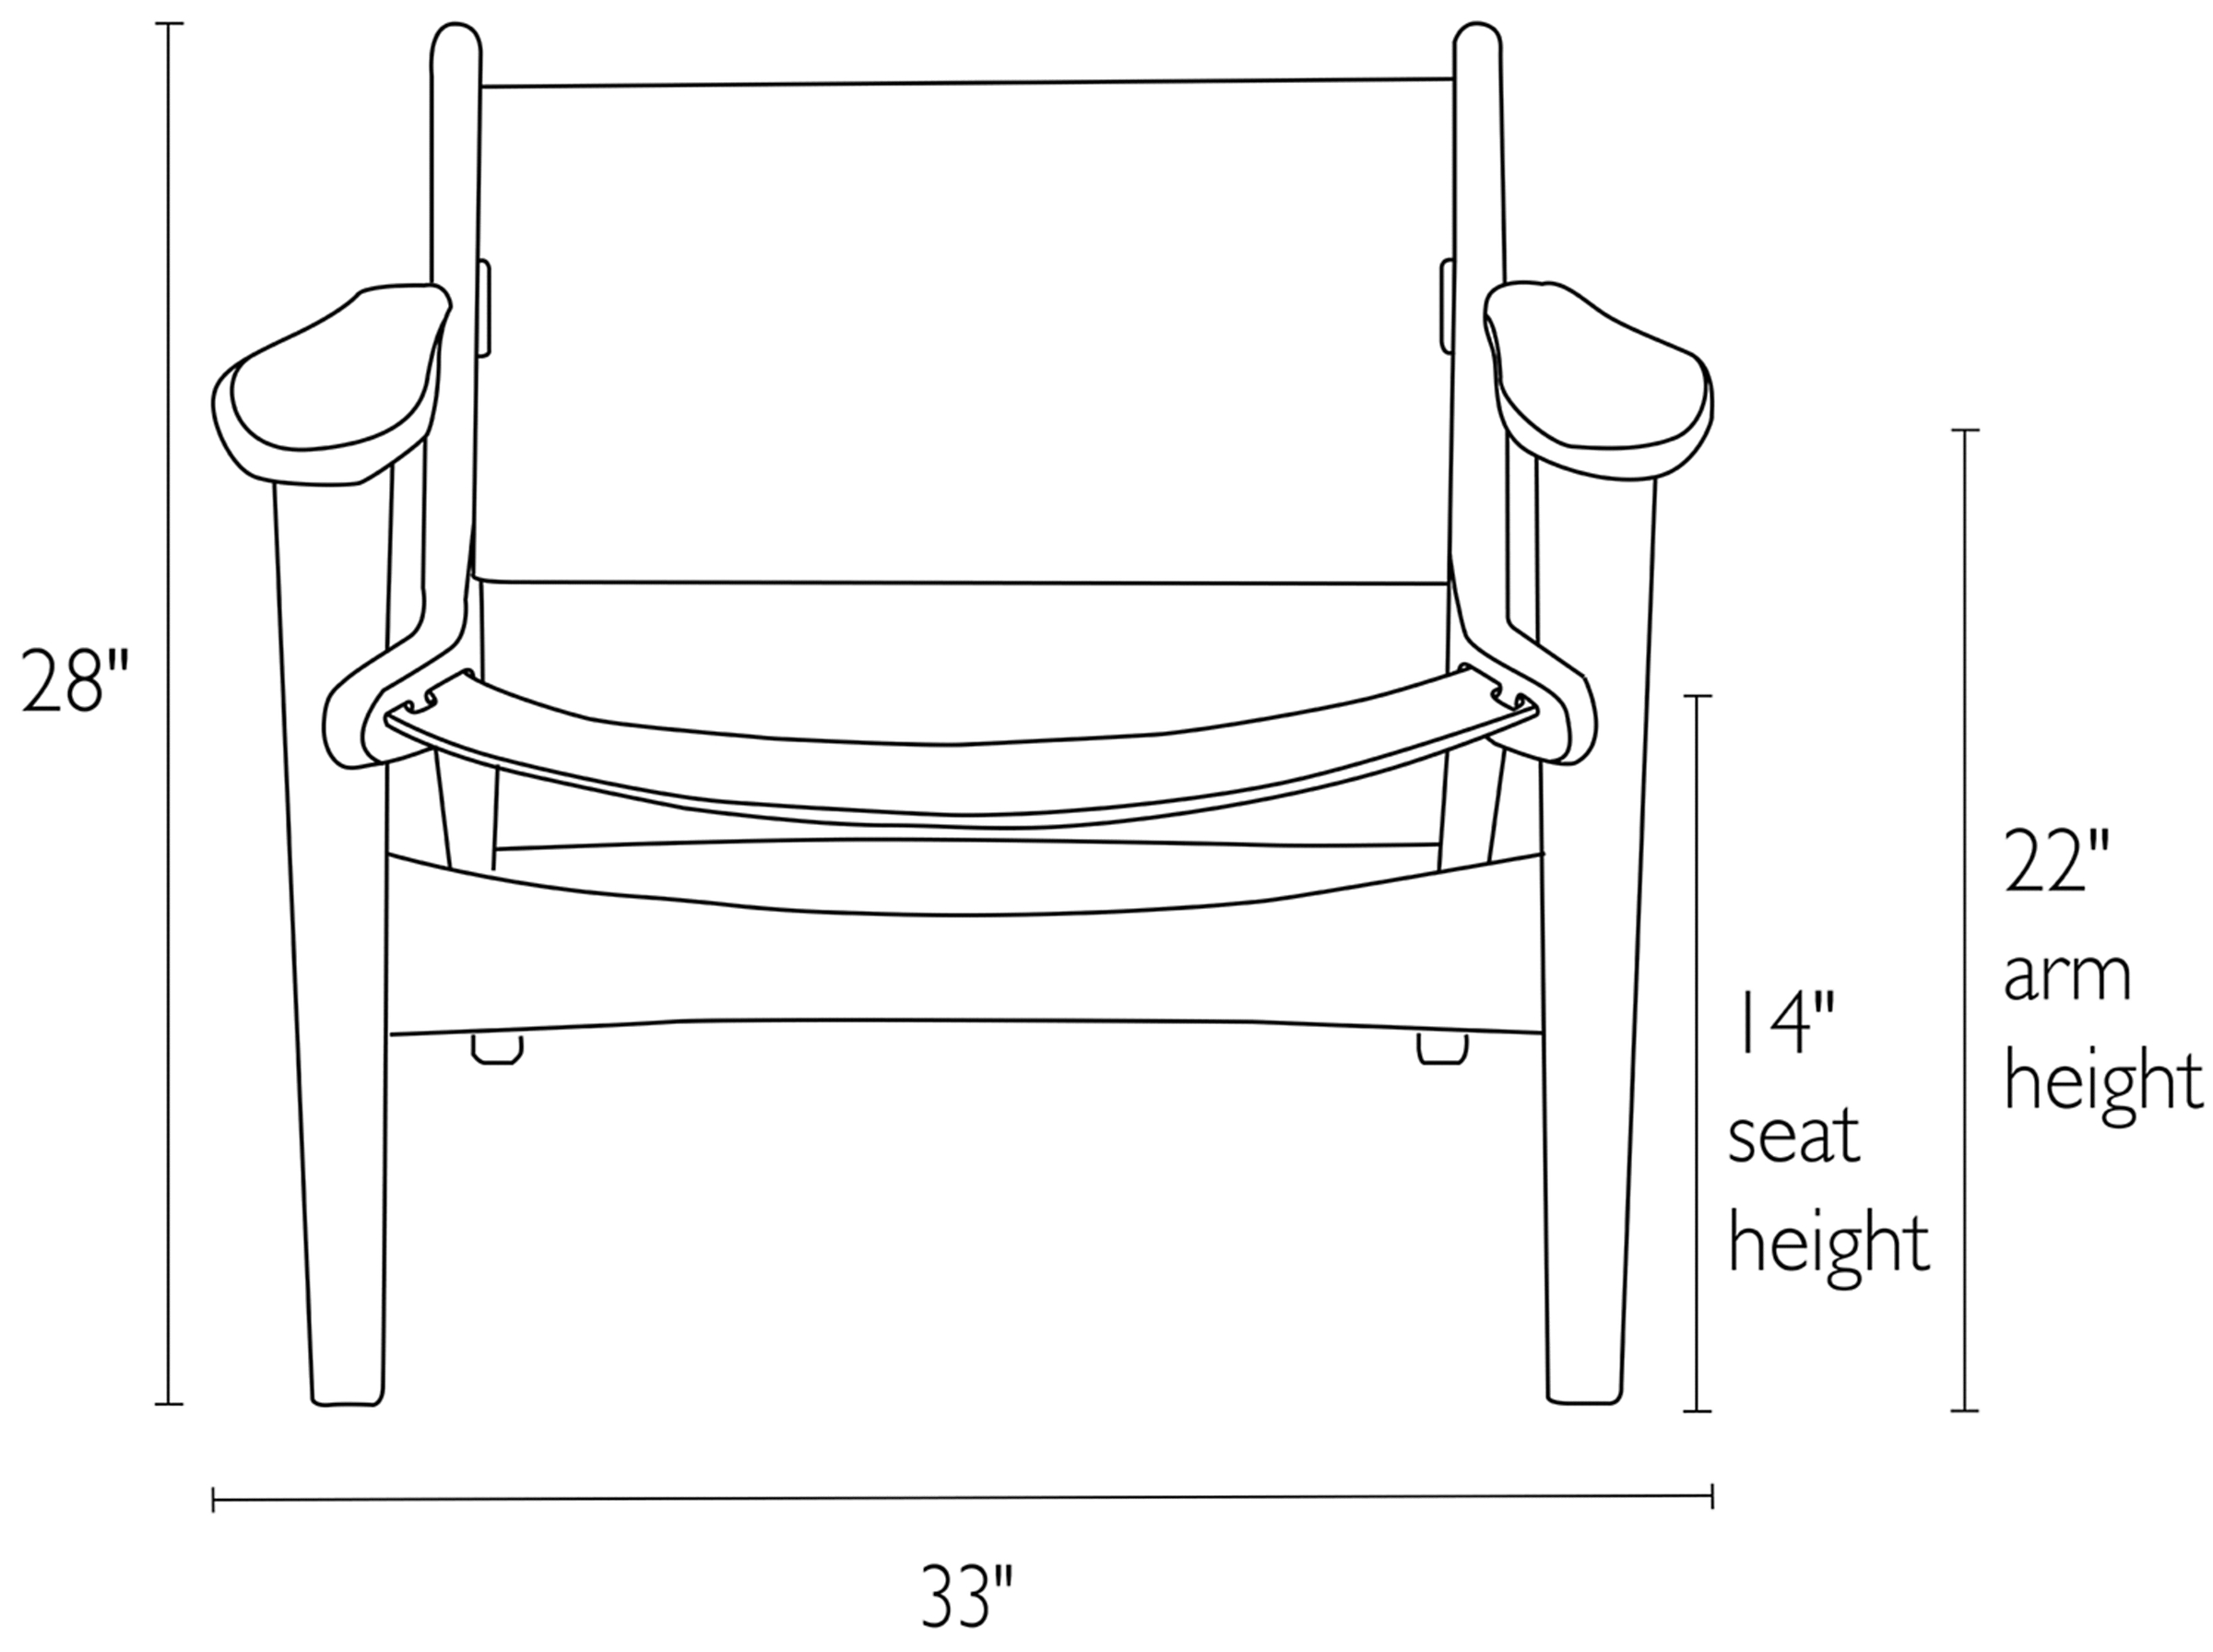 Front view dimension illustration of Lars chair.